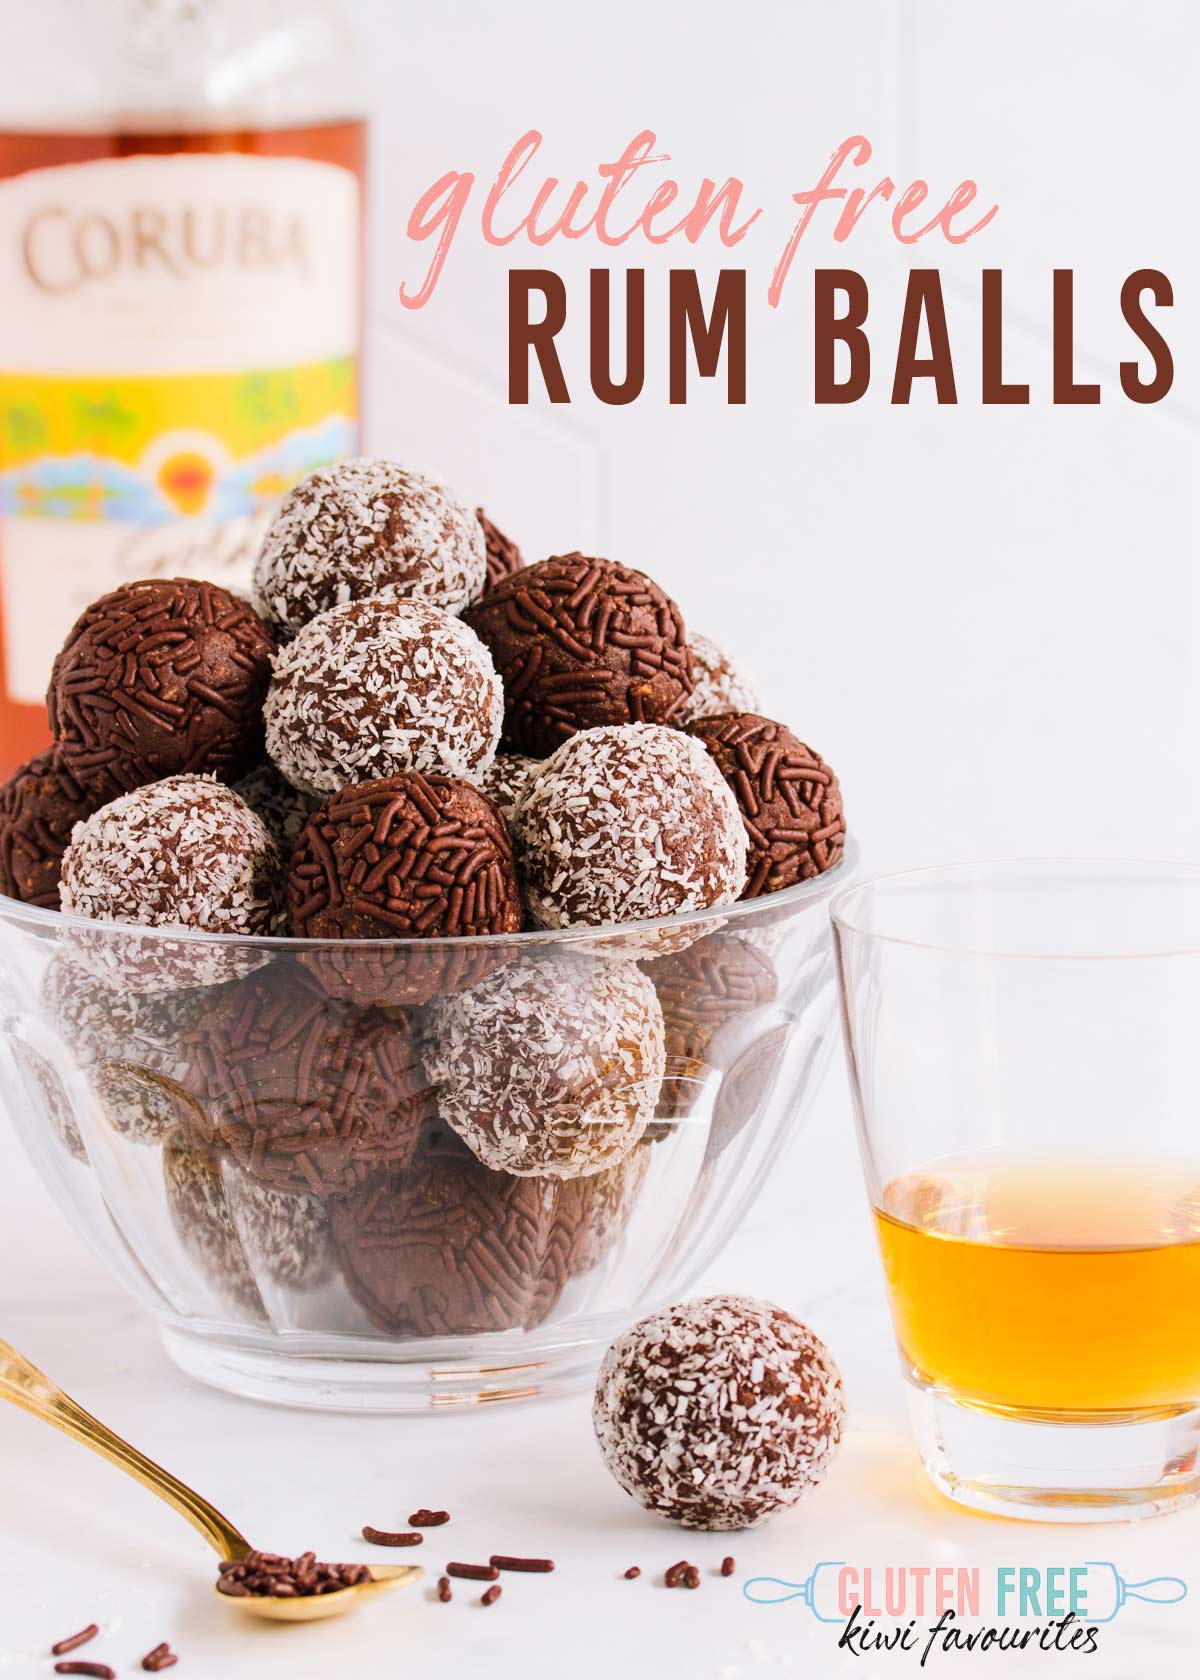 Rum balls in a glass bowl with text overlay reading: "Gluten Free Rum Balls".